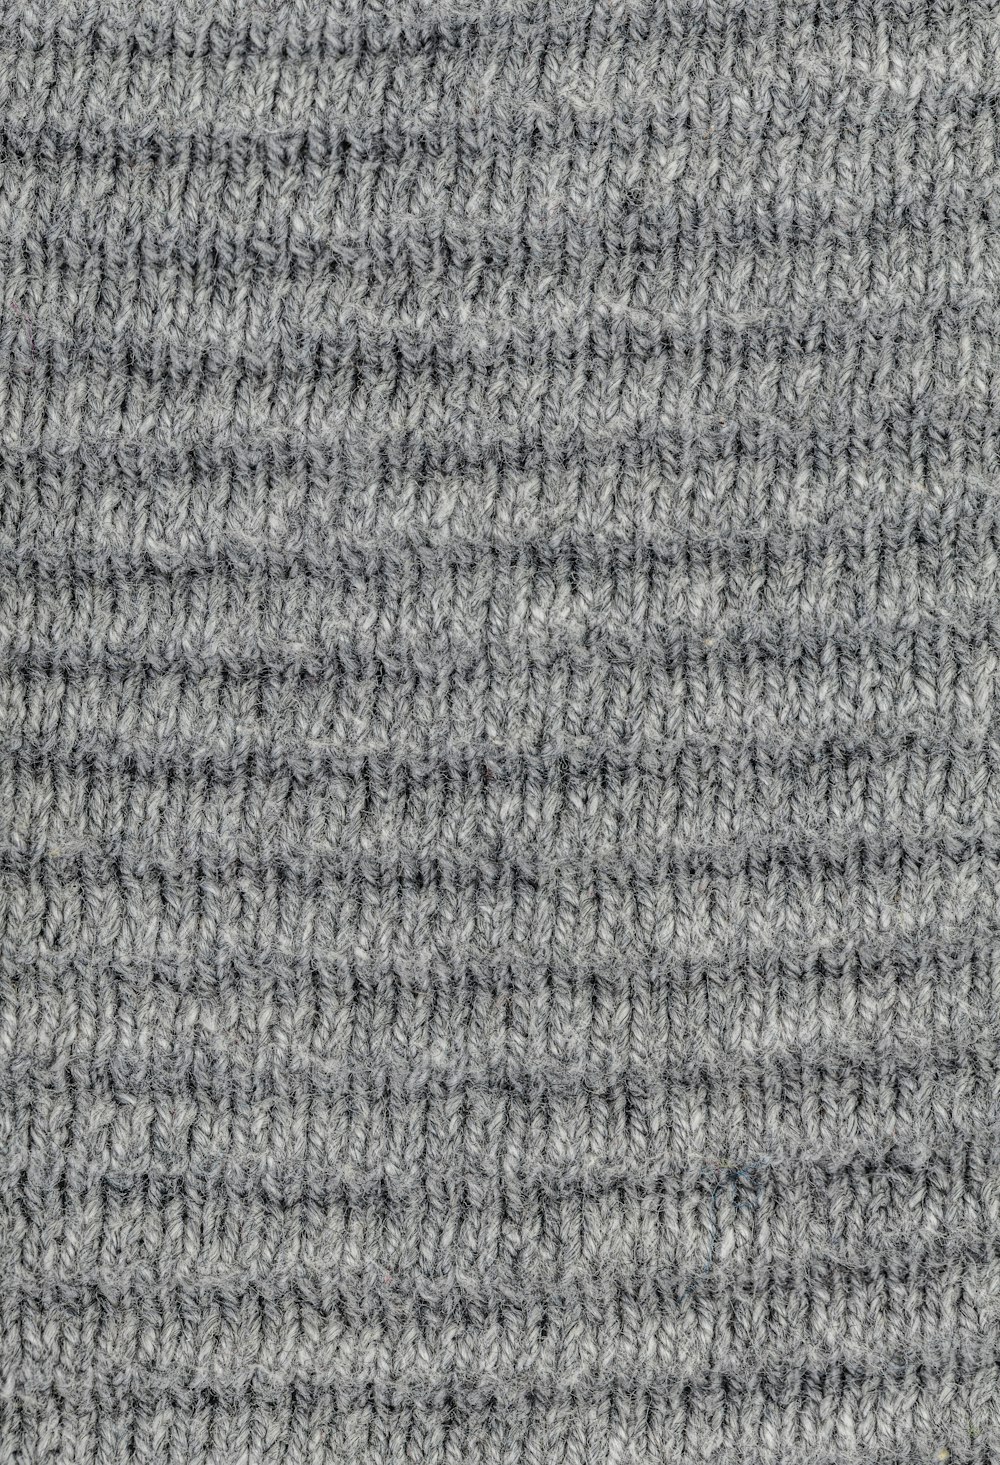 a close up of a gray knitted material